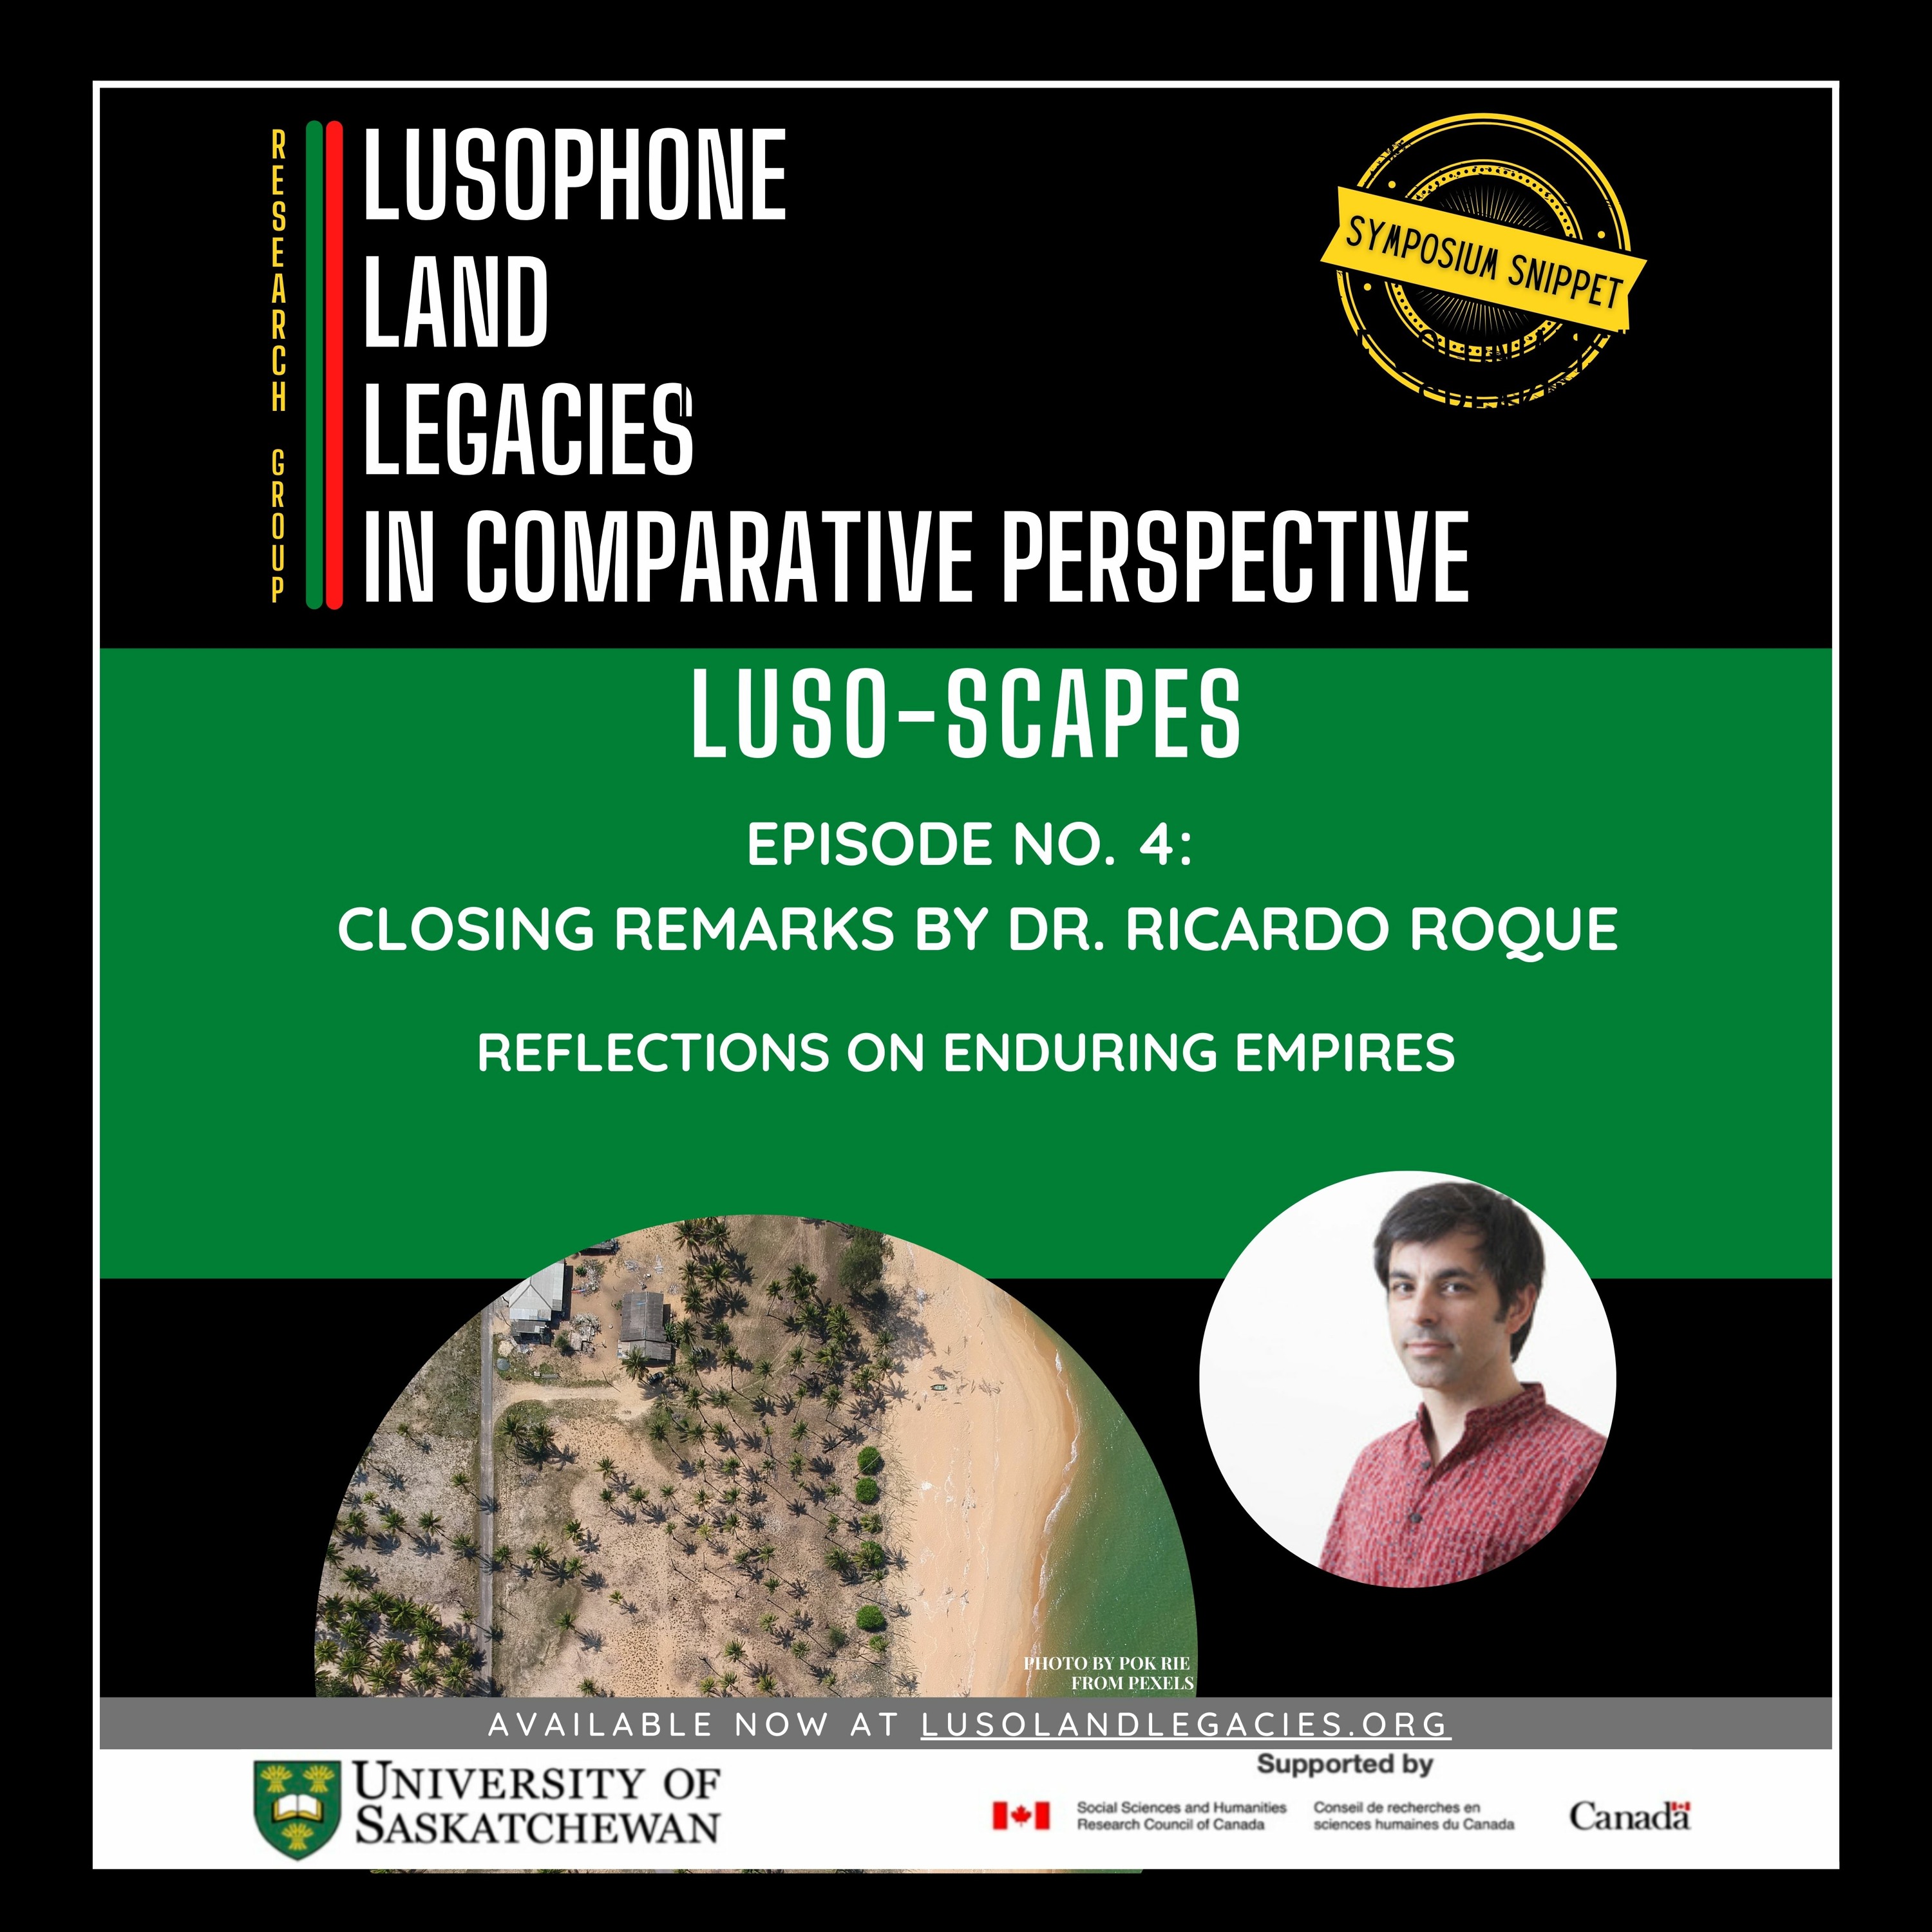 Episode #4: Symposium Snippet - Closing Remarks by Dr. Ricardo Roque